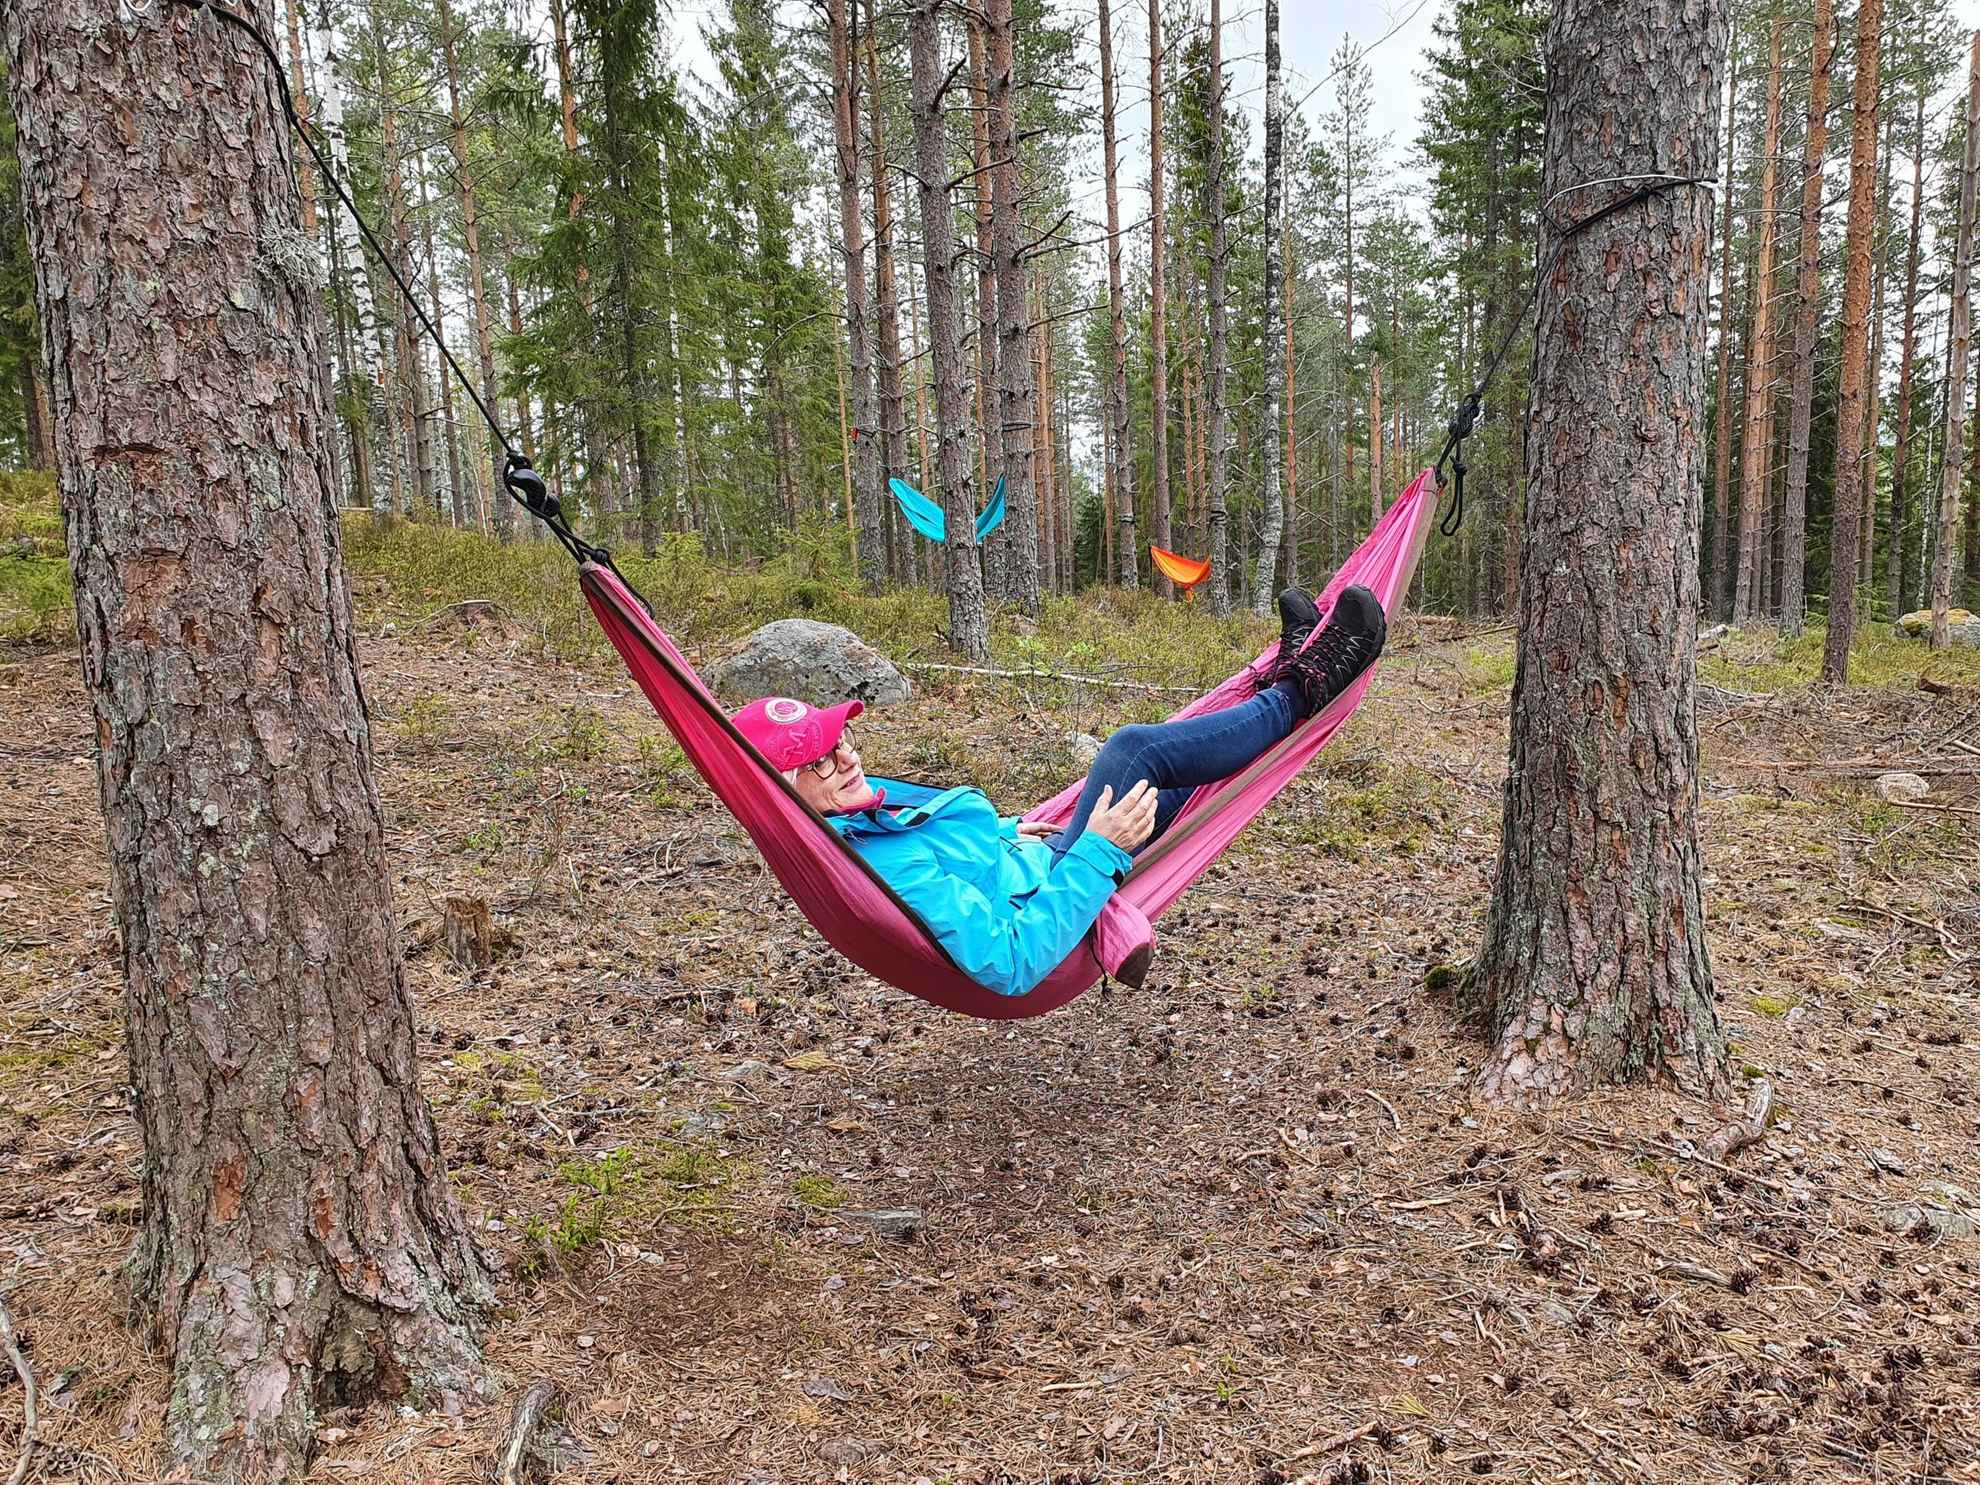 A woman relaxes in a pink hammock between two pines. There is a blue and an orange hammock between the trees in the background.